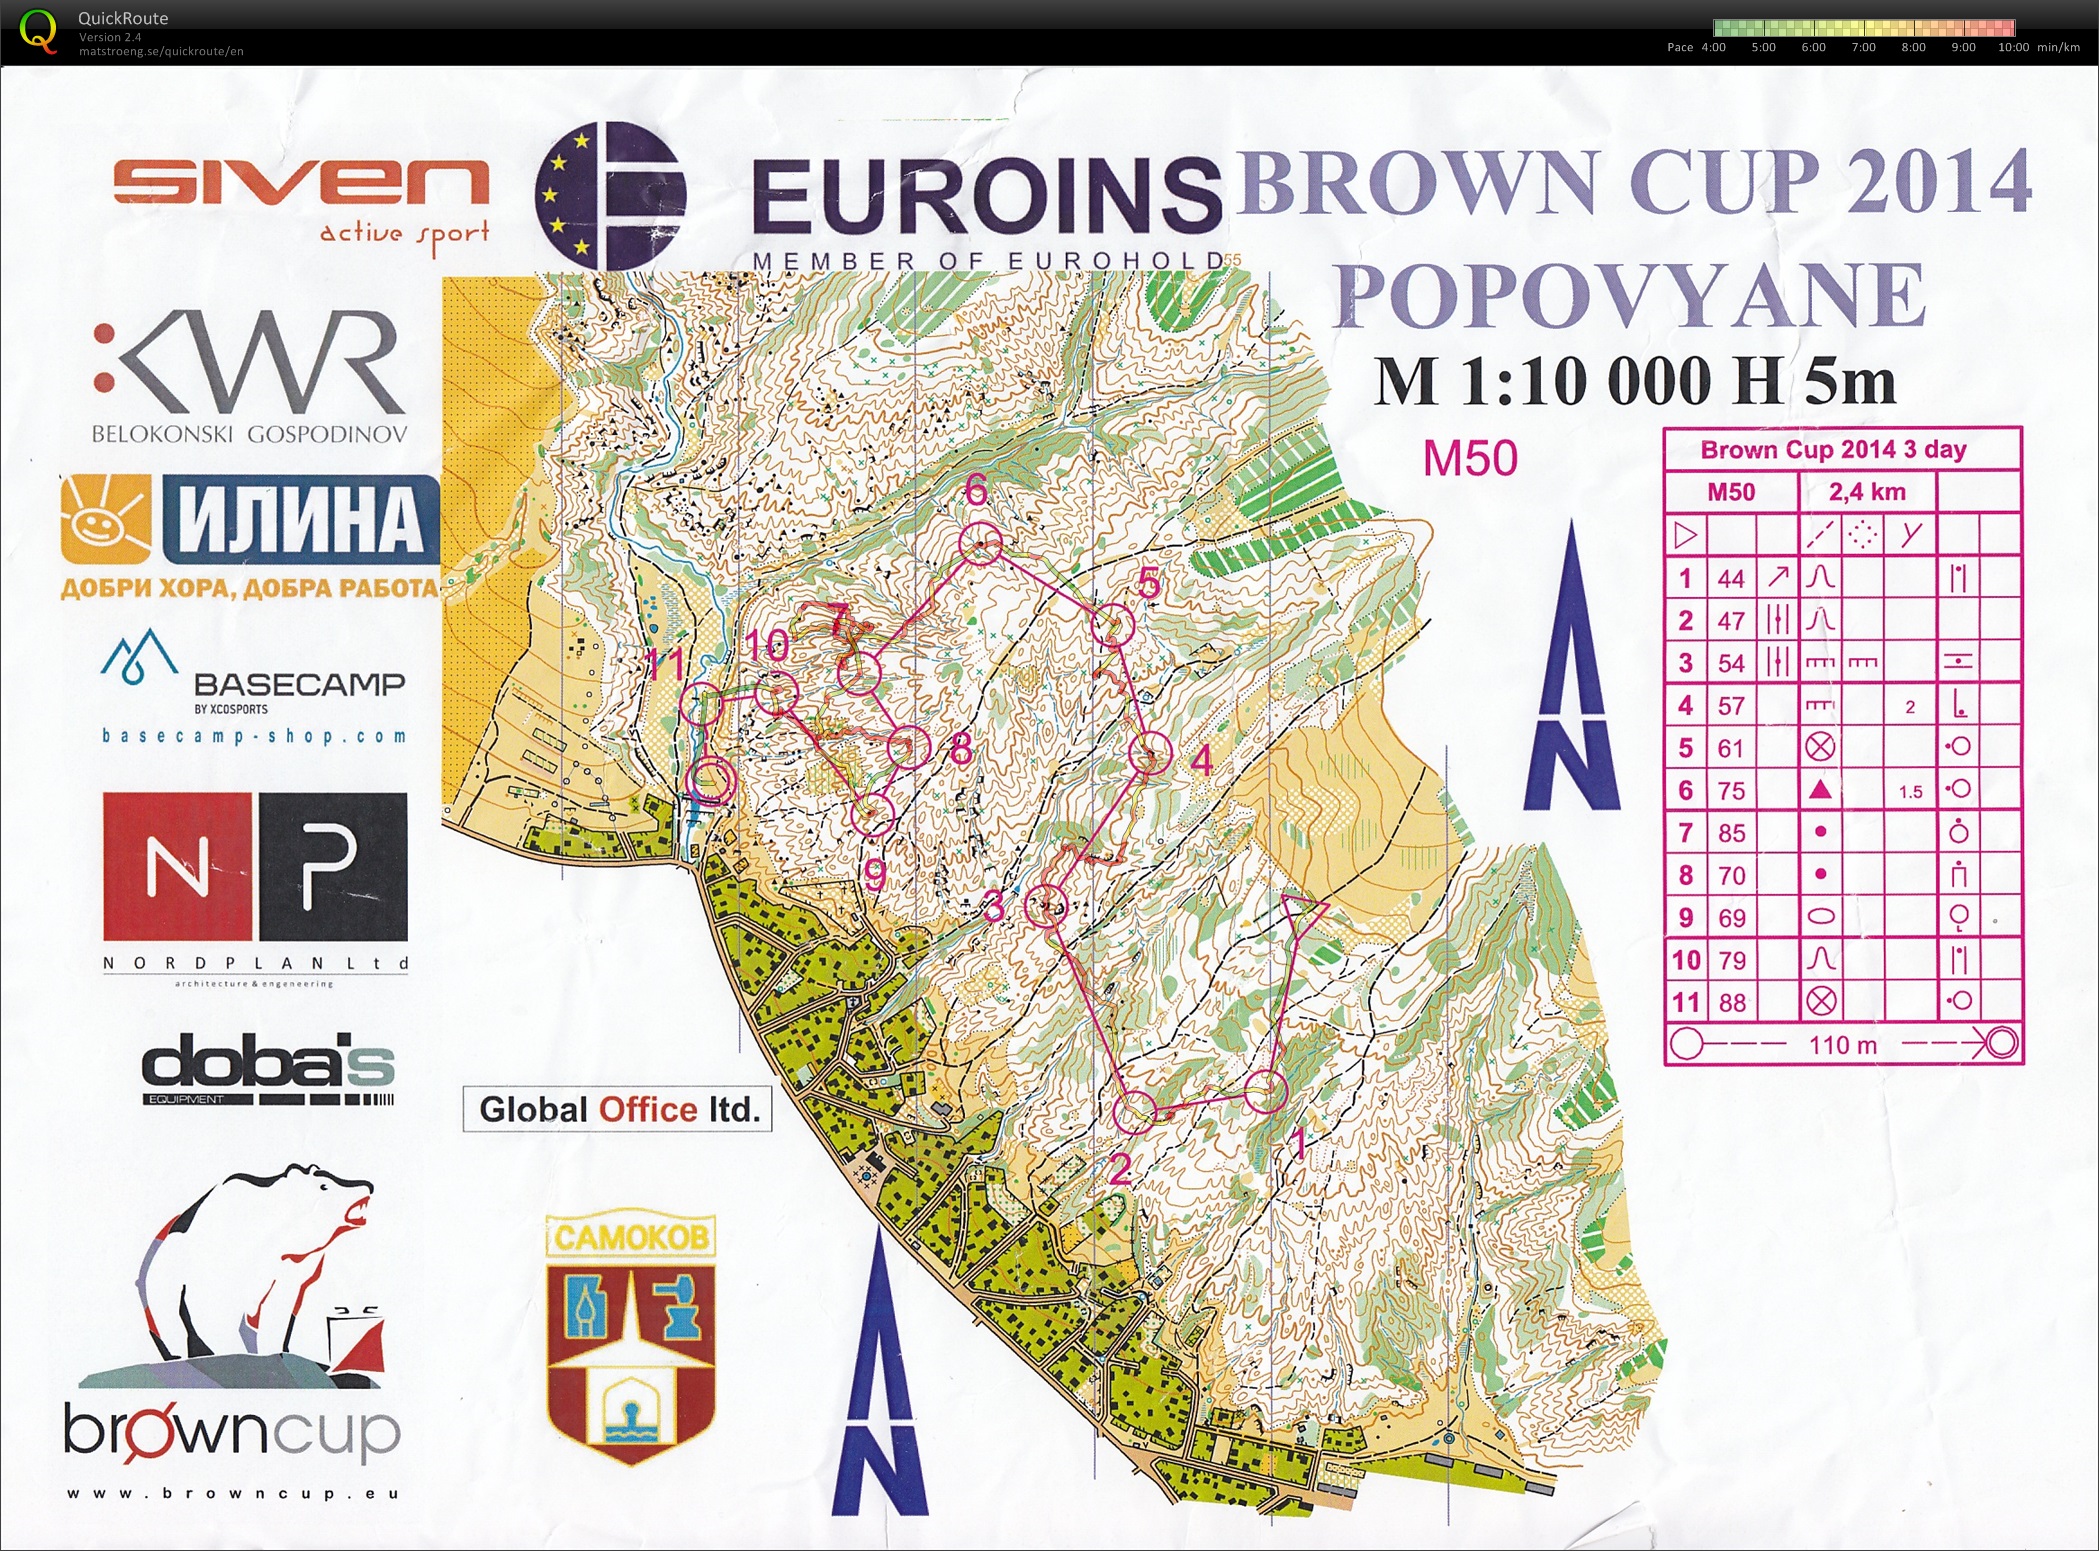 Brown-Cup 2014 E3 (05/05/2014)